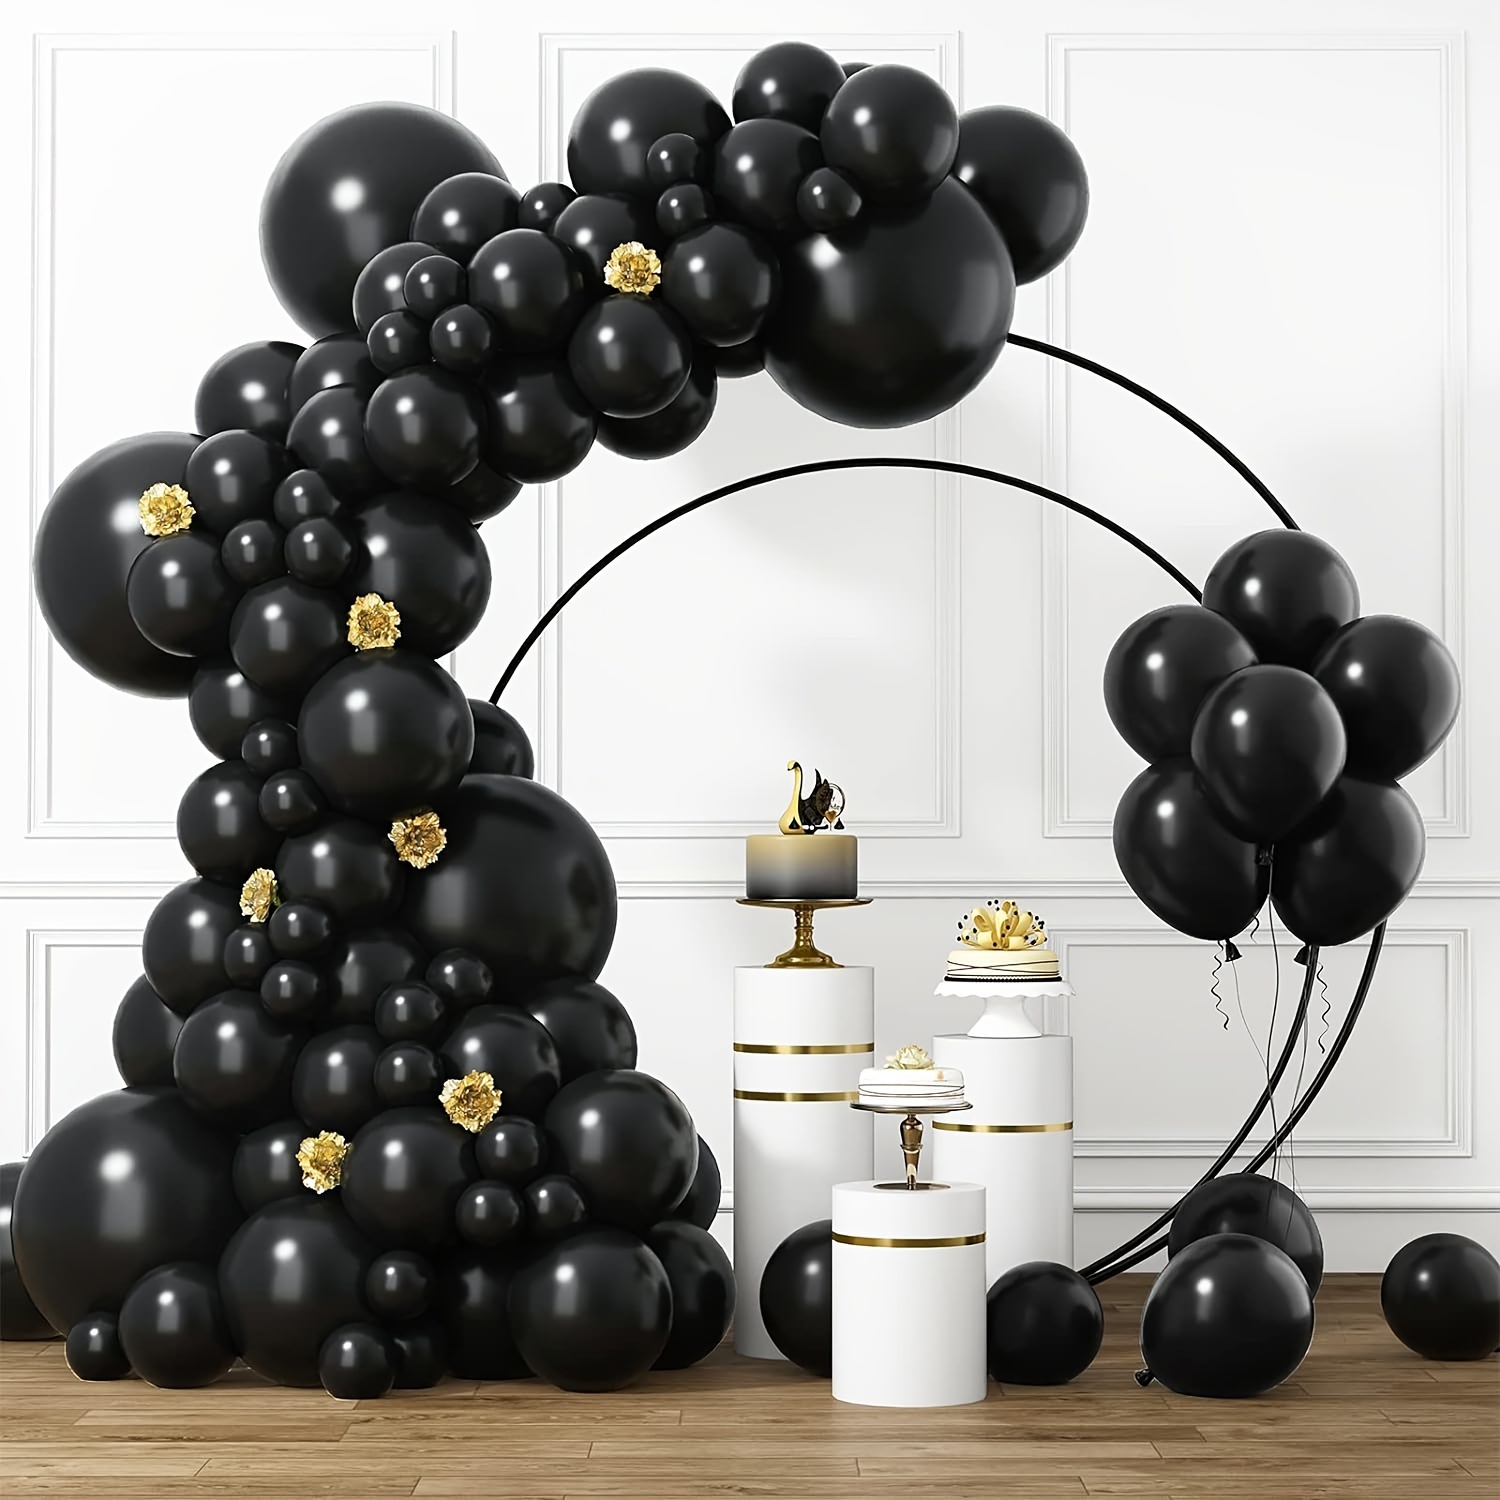 

110pcs Black Latex Balloon Set For Birthday Party Decoration Graduation Festival Party Bridal Shower Christmas Halloween Valentine's Day Mother's Day Various Festival Holiday